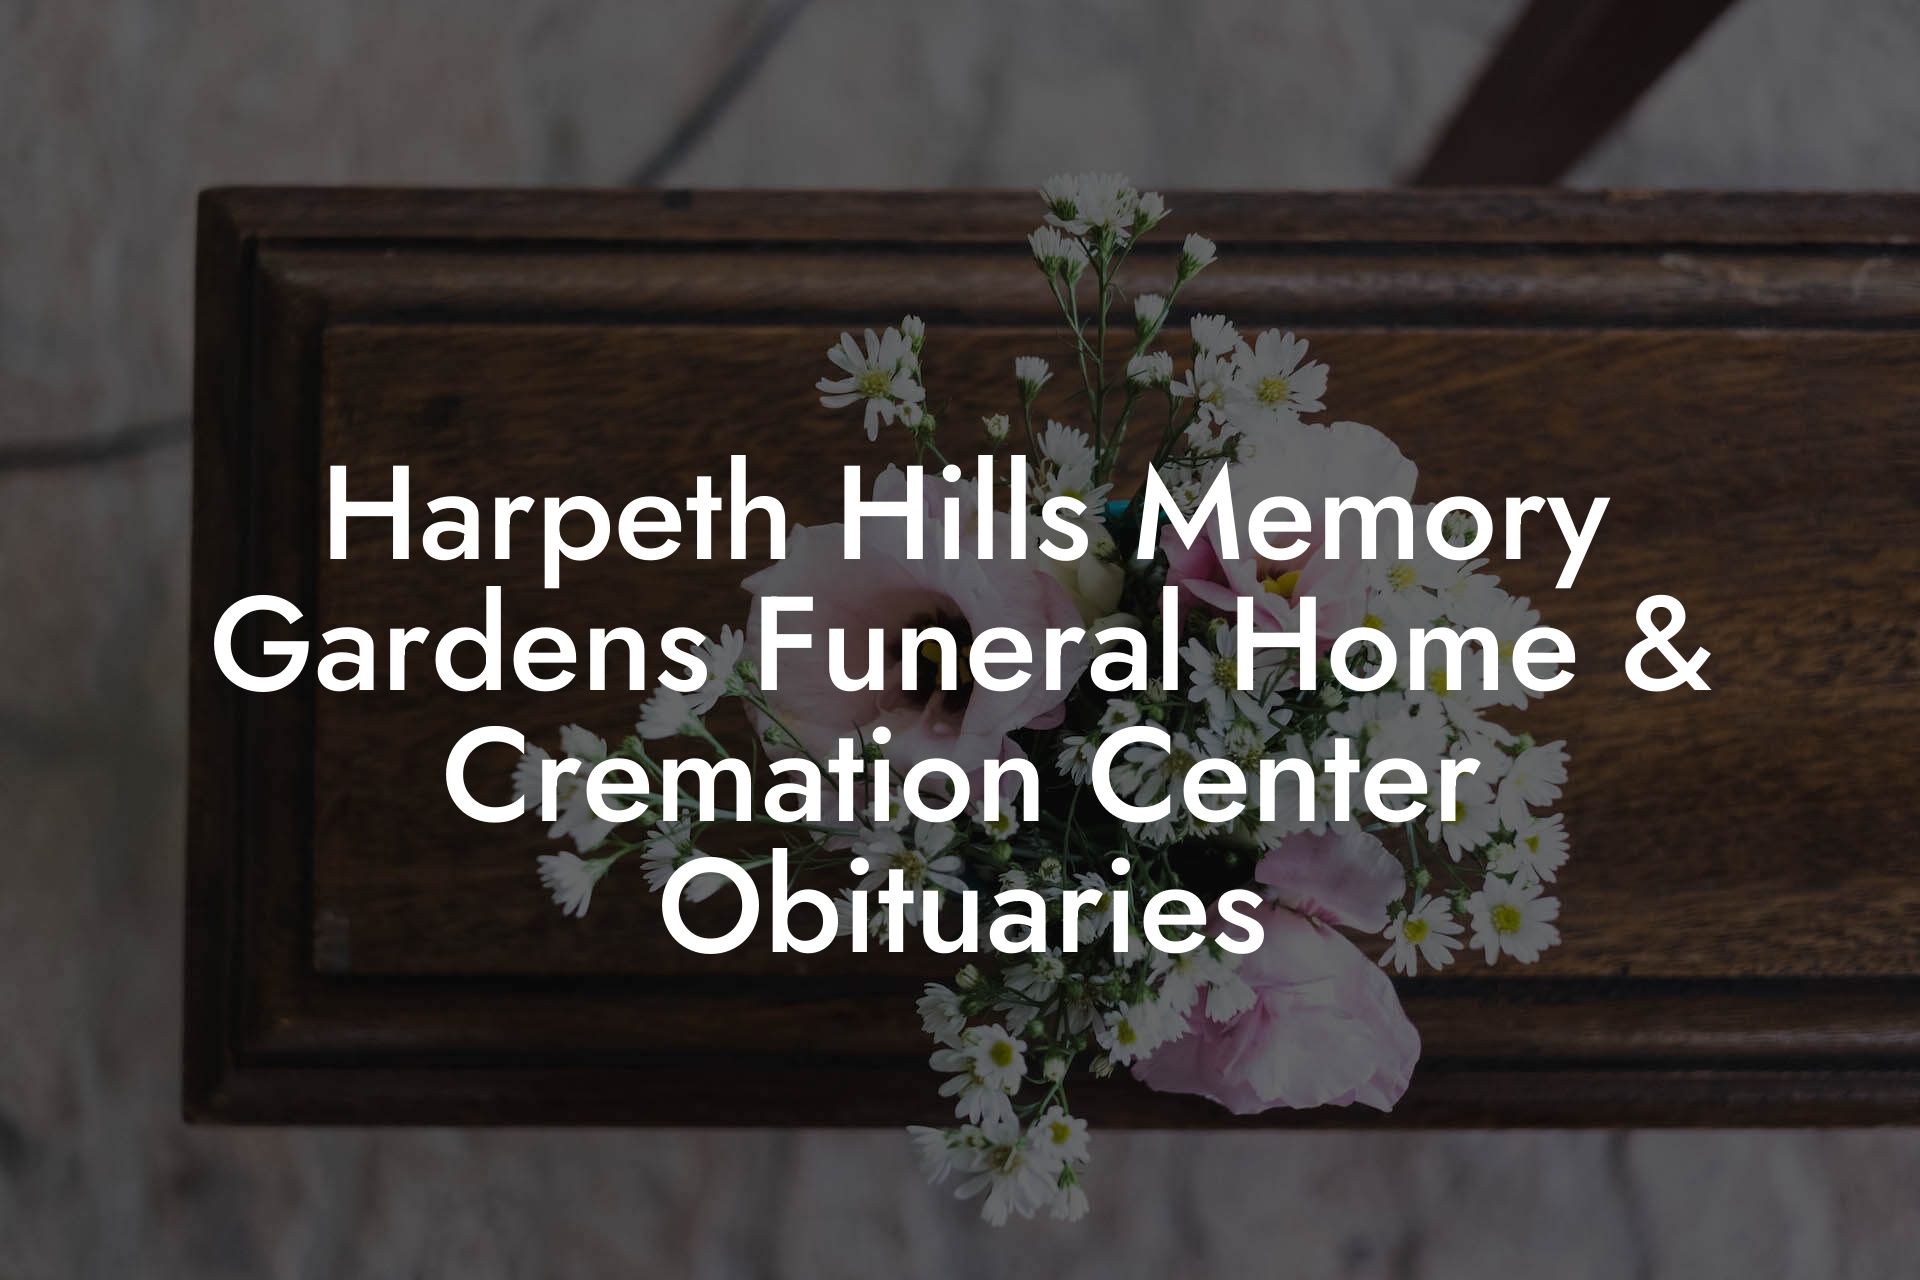 Harpeth Hills Memory Gardens Funeral Home & Cremation Center Obituaries